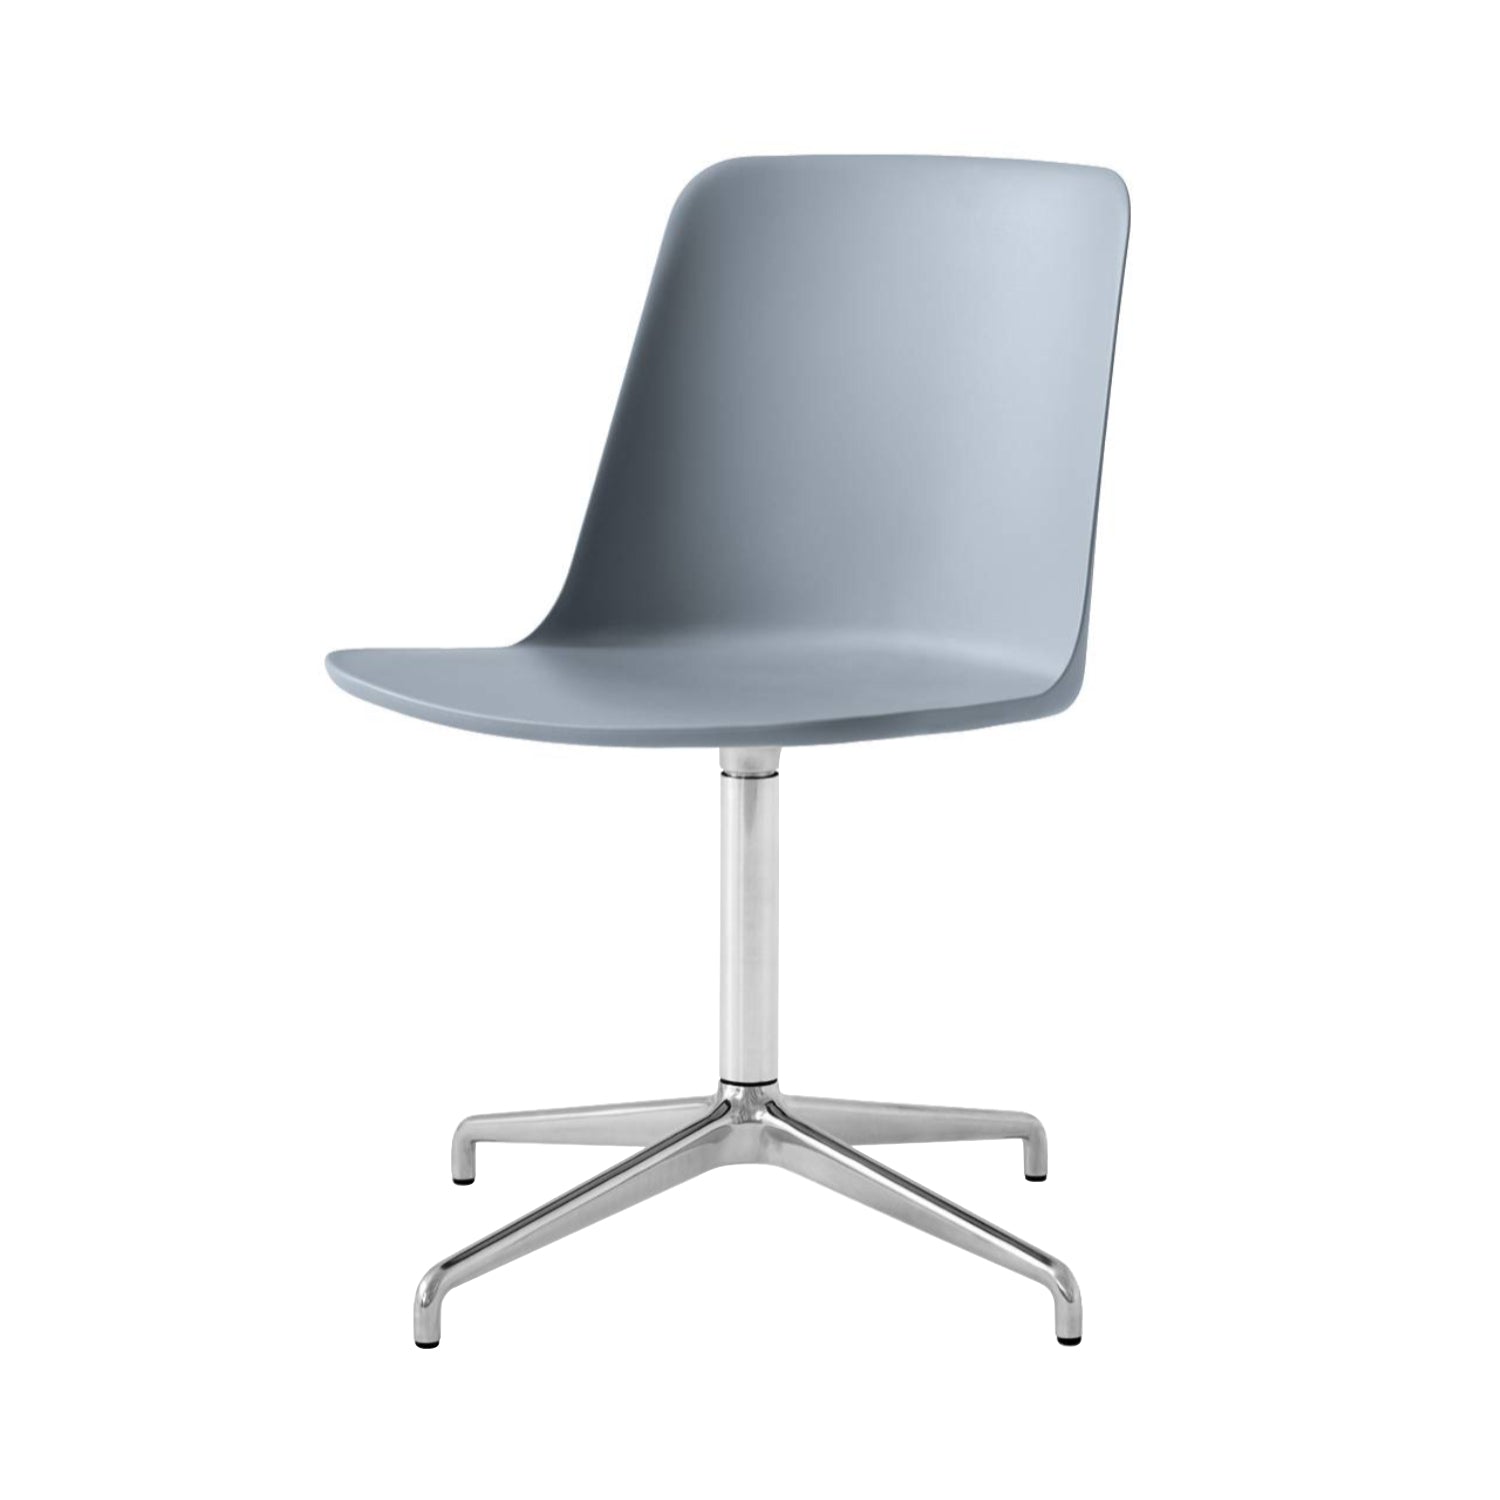 Rely Chair HW16: Light Blue + Polished Aluminum